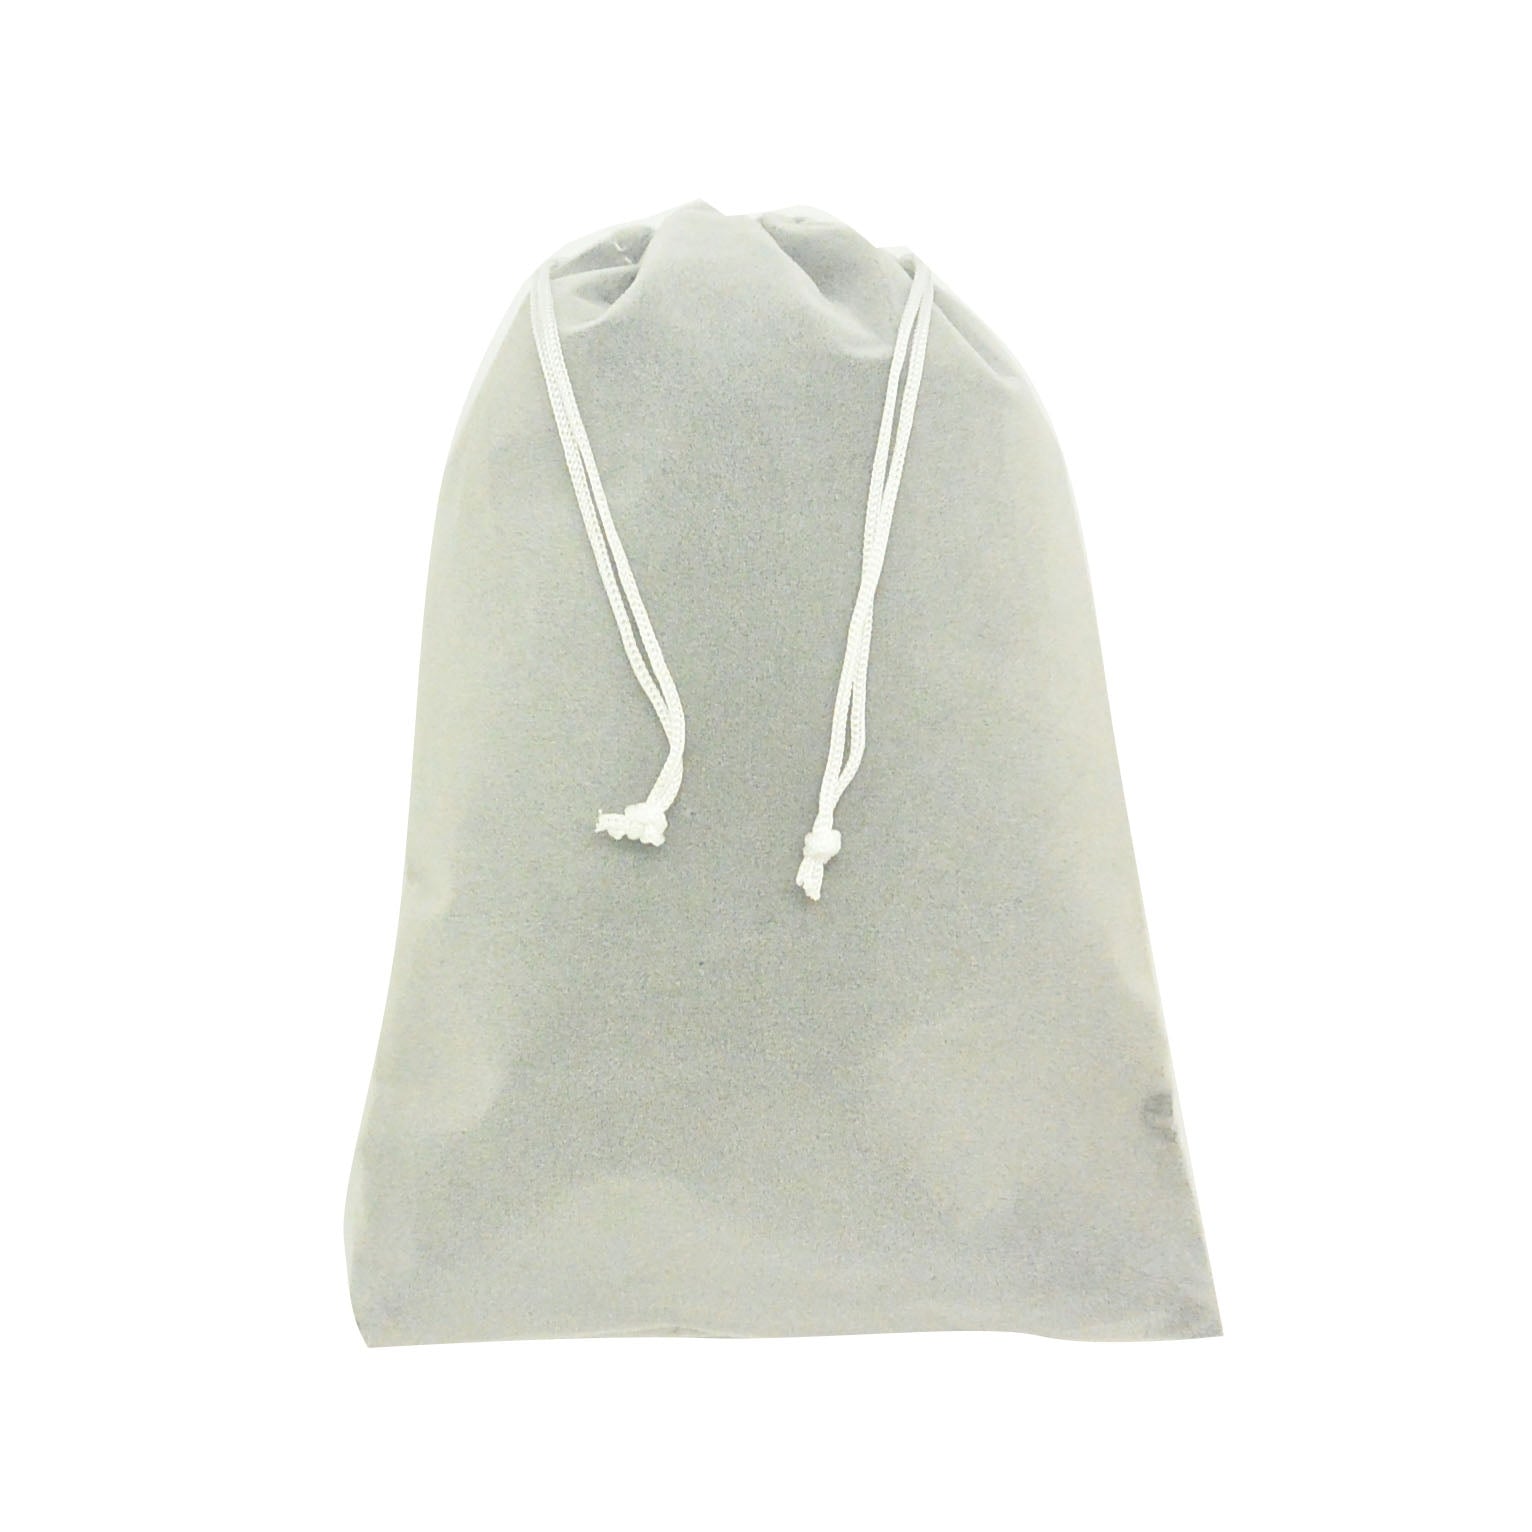 X-Large Gray High Quality Velvet Pouch Bags Party Favors